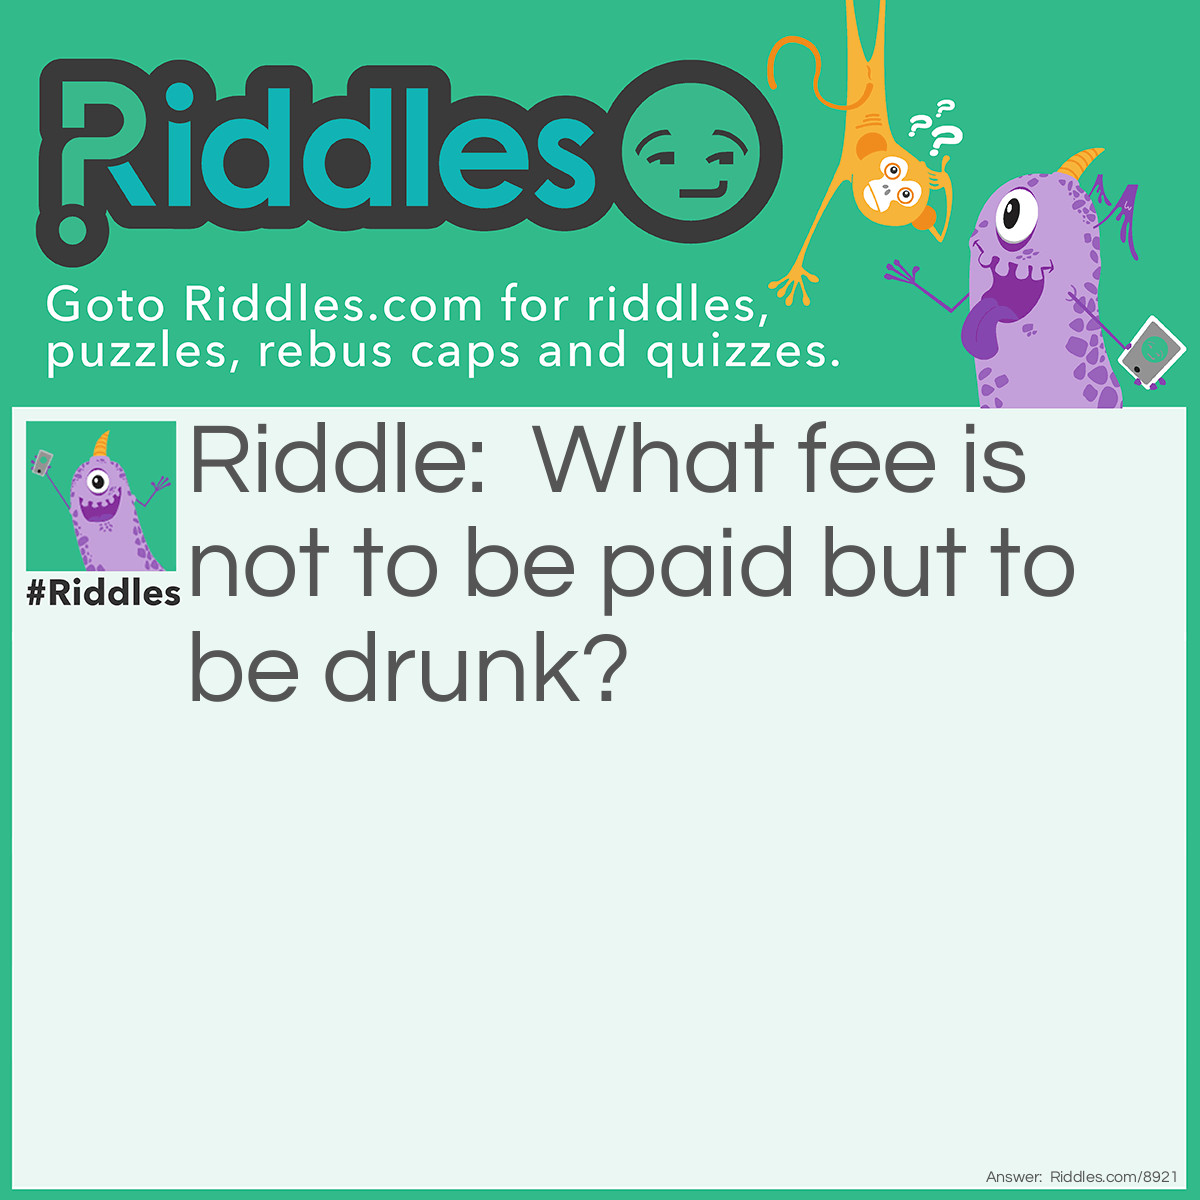 Riddle: What fee is not to be paid but to be drunk? Answer: COFfee!